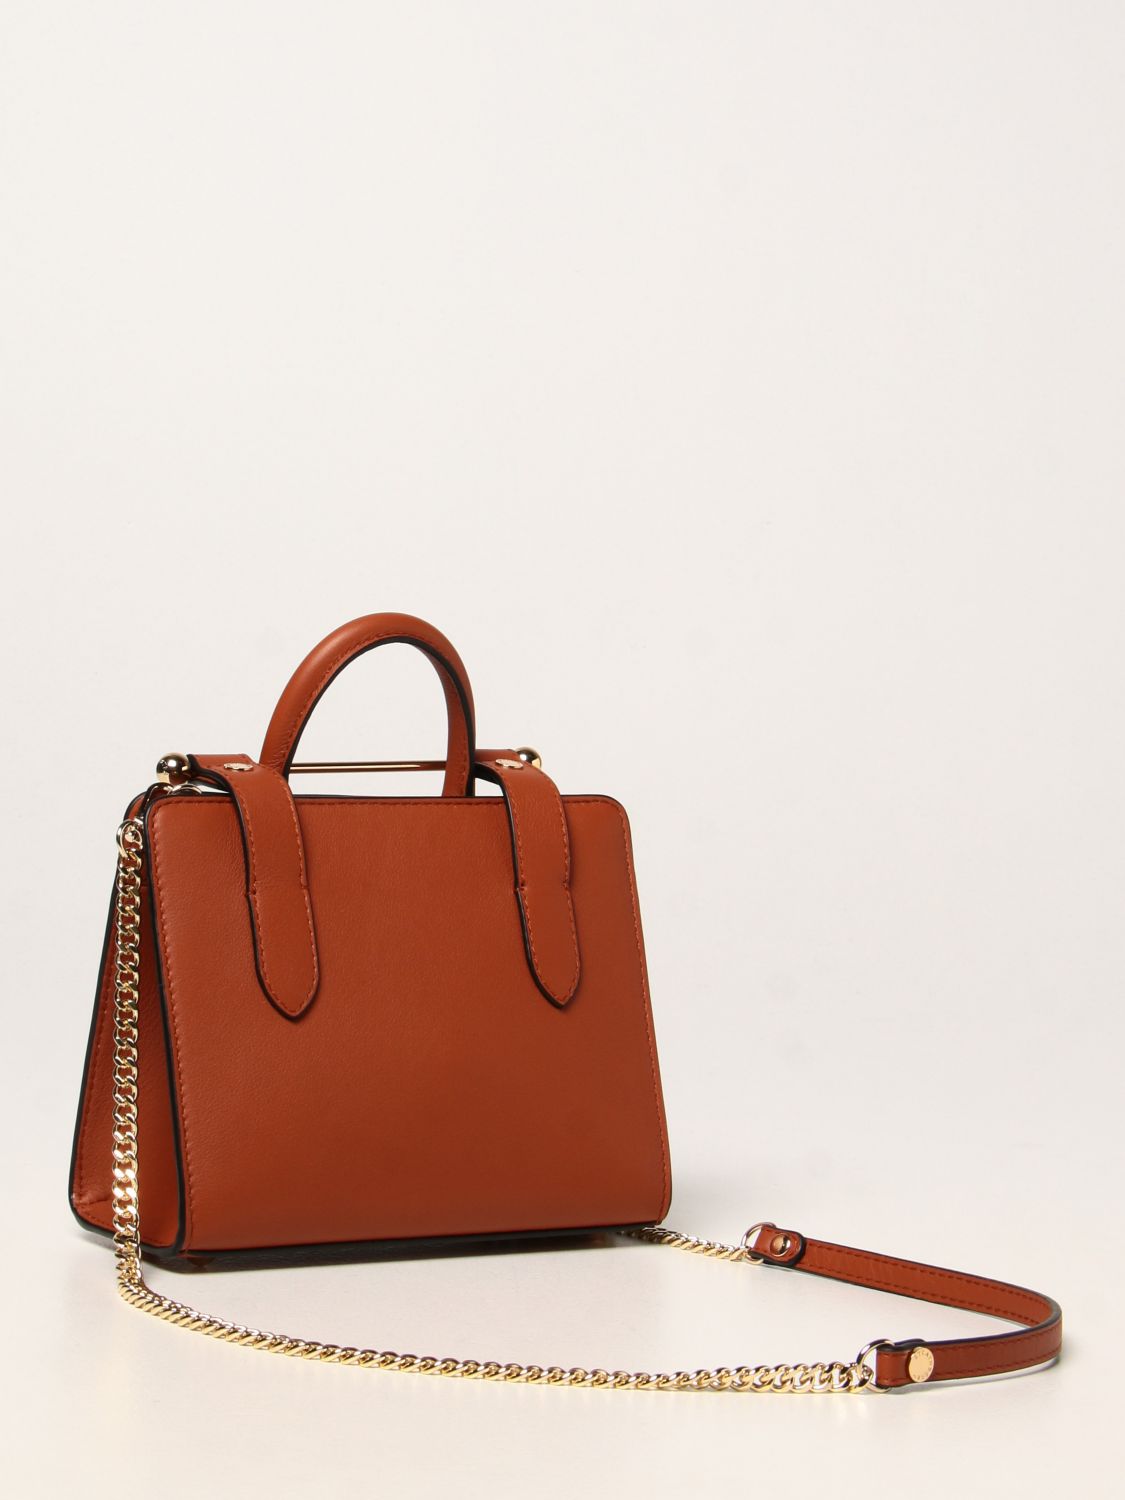 Strathberry The Nano Tote Bag In Brown Leather in Natural